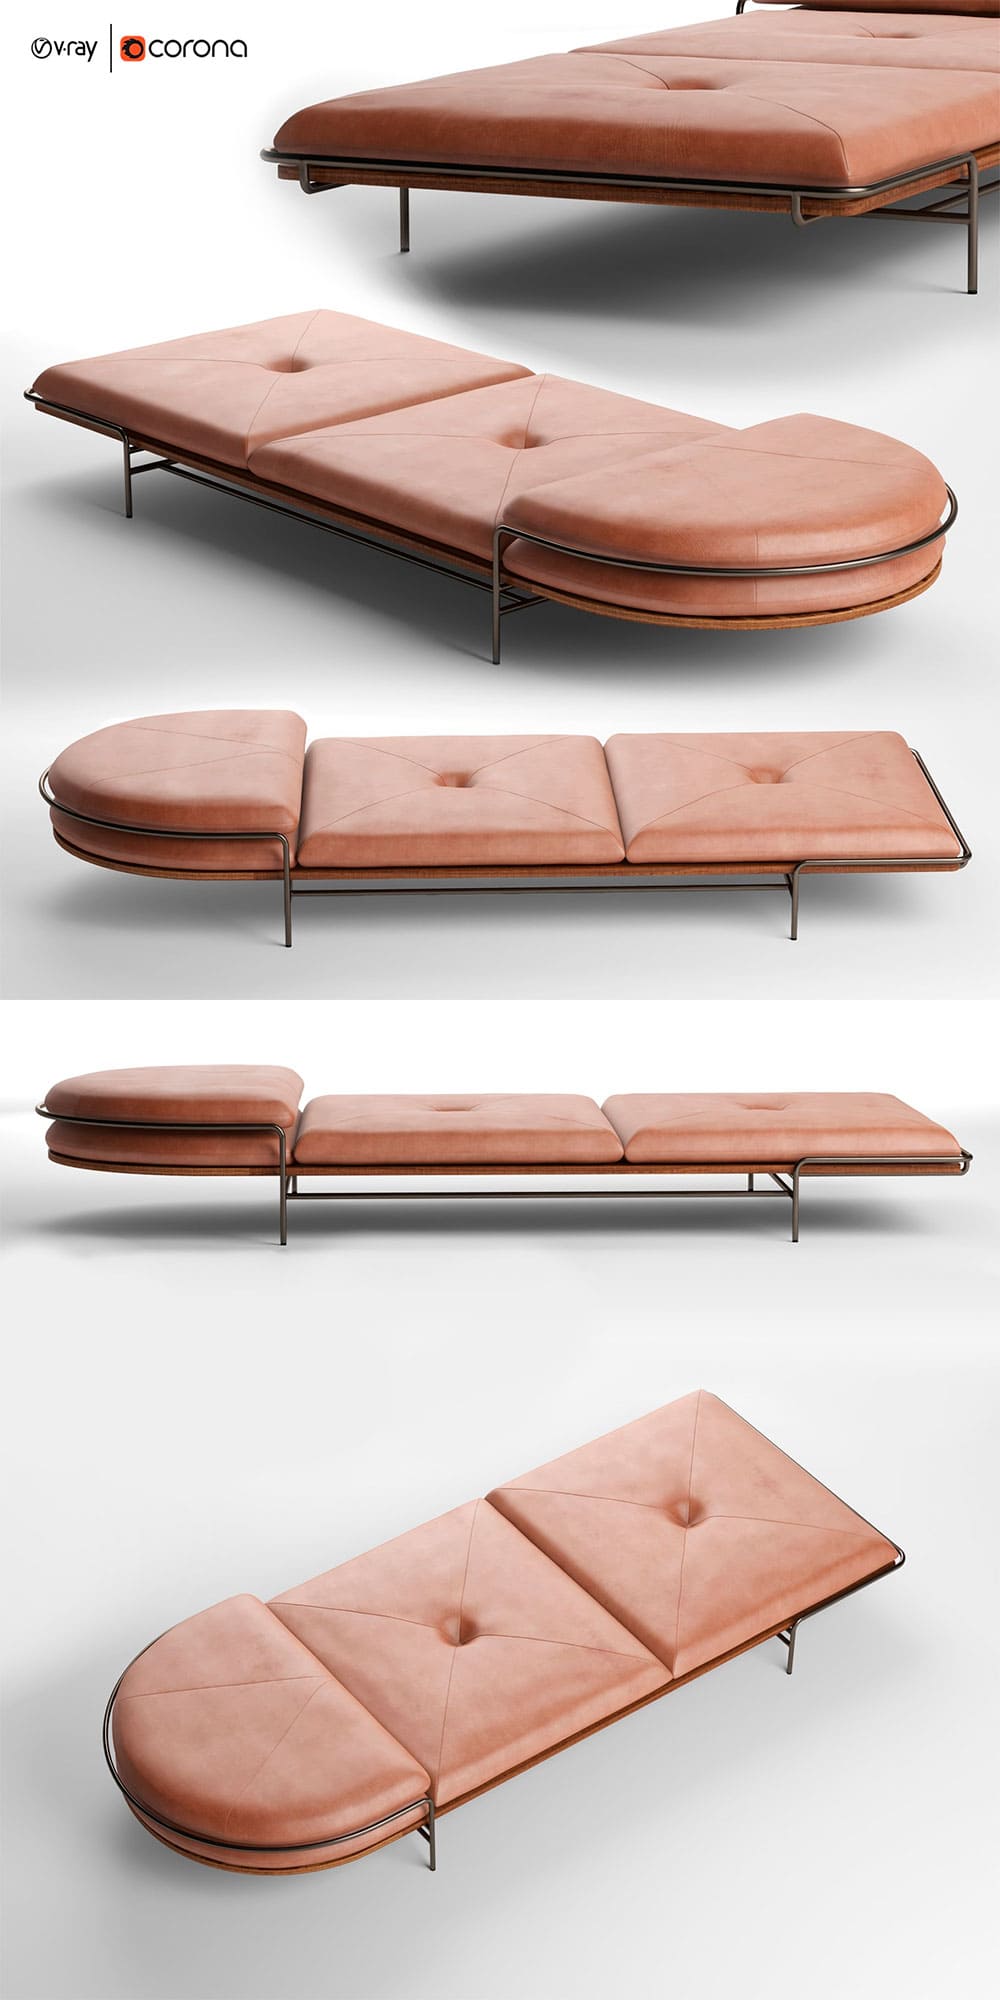 Geometric daybed by bassam fellows, picture for pinterest.